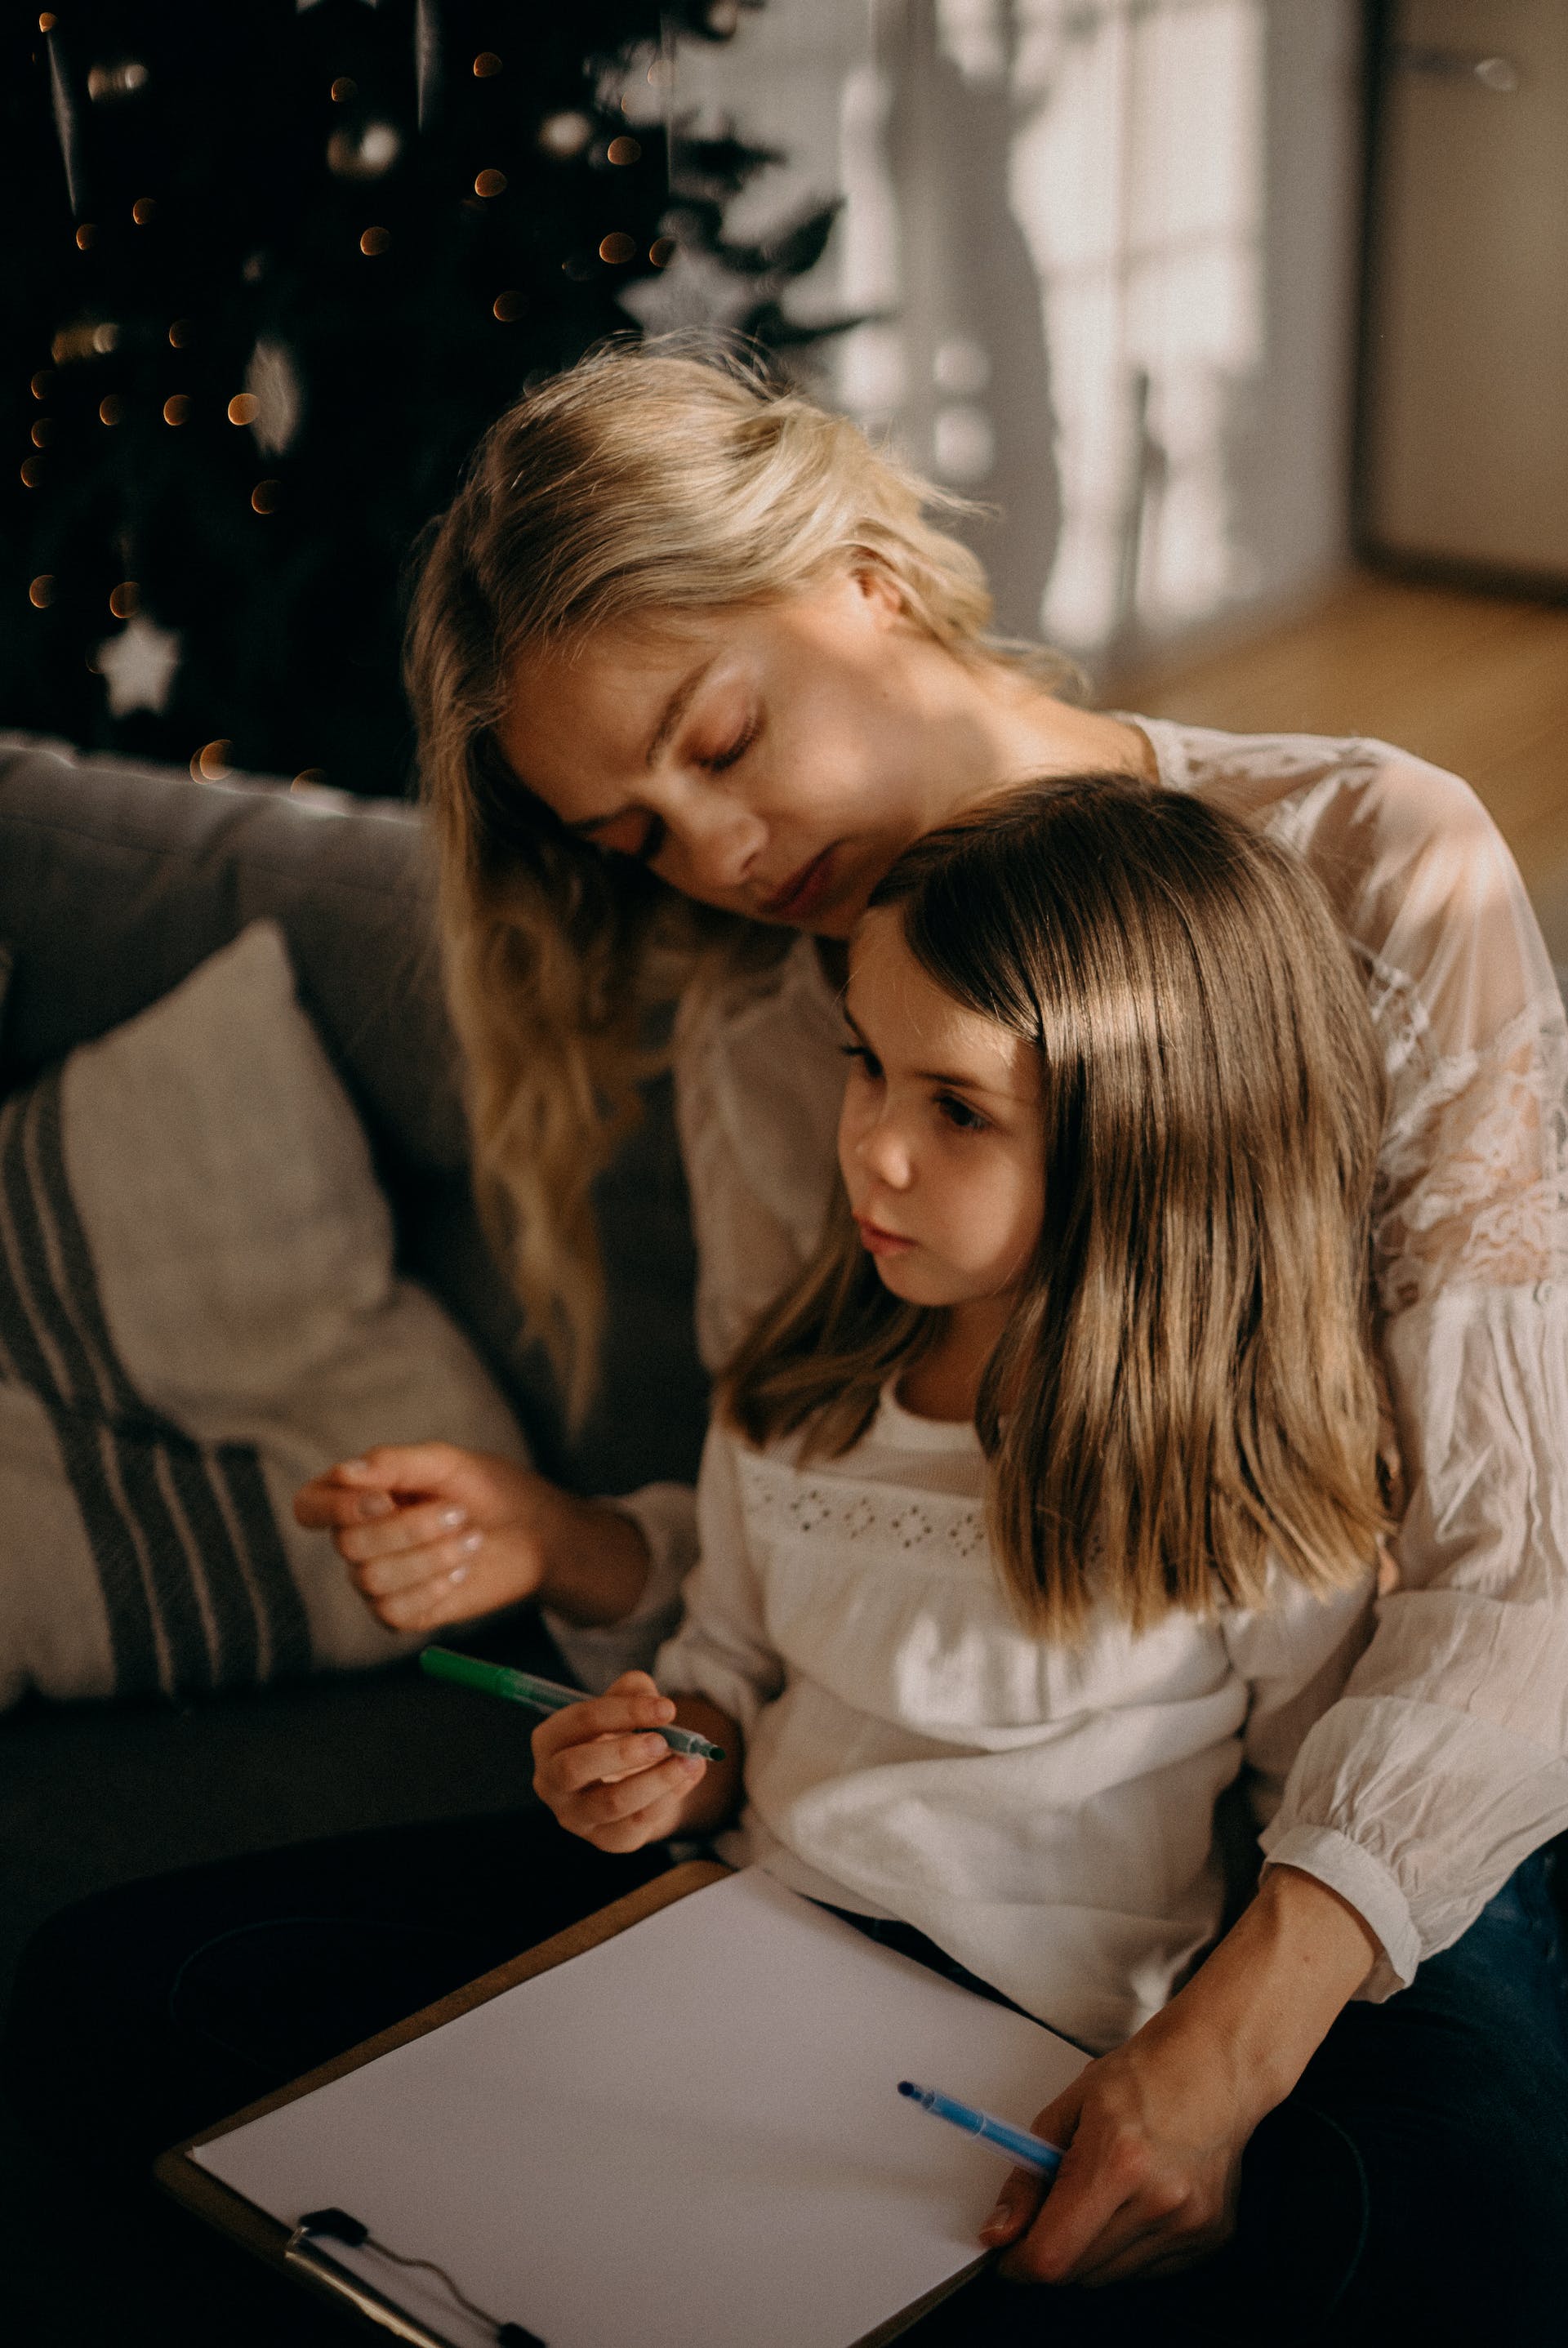 A woman sitting with a little girl | Source: Pexels